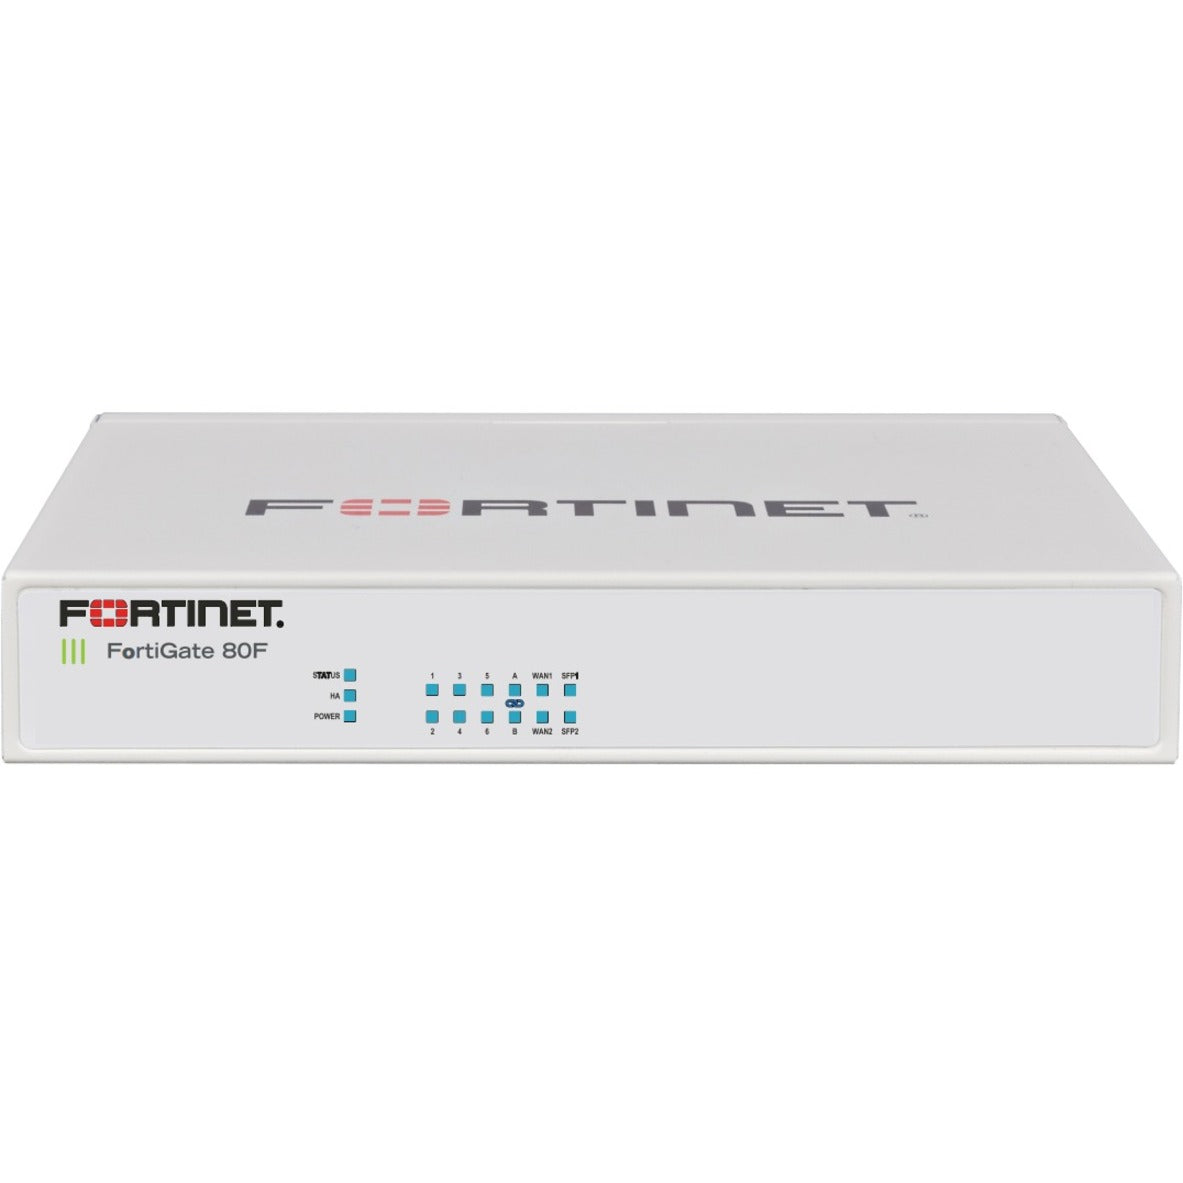 Fortinet FortiGate 80F Network Security/Firewall Appliance (FG-80F)